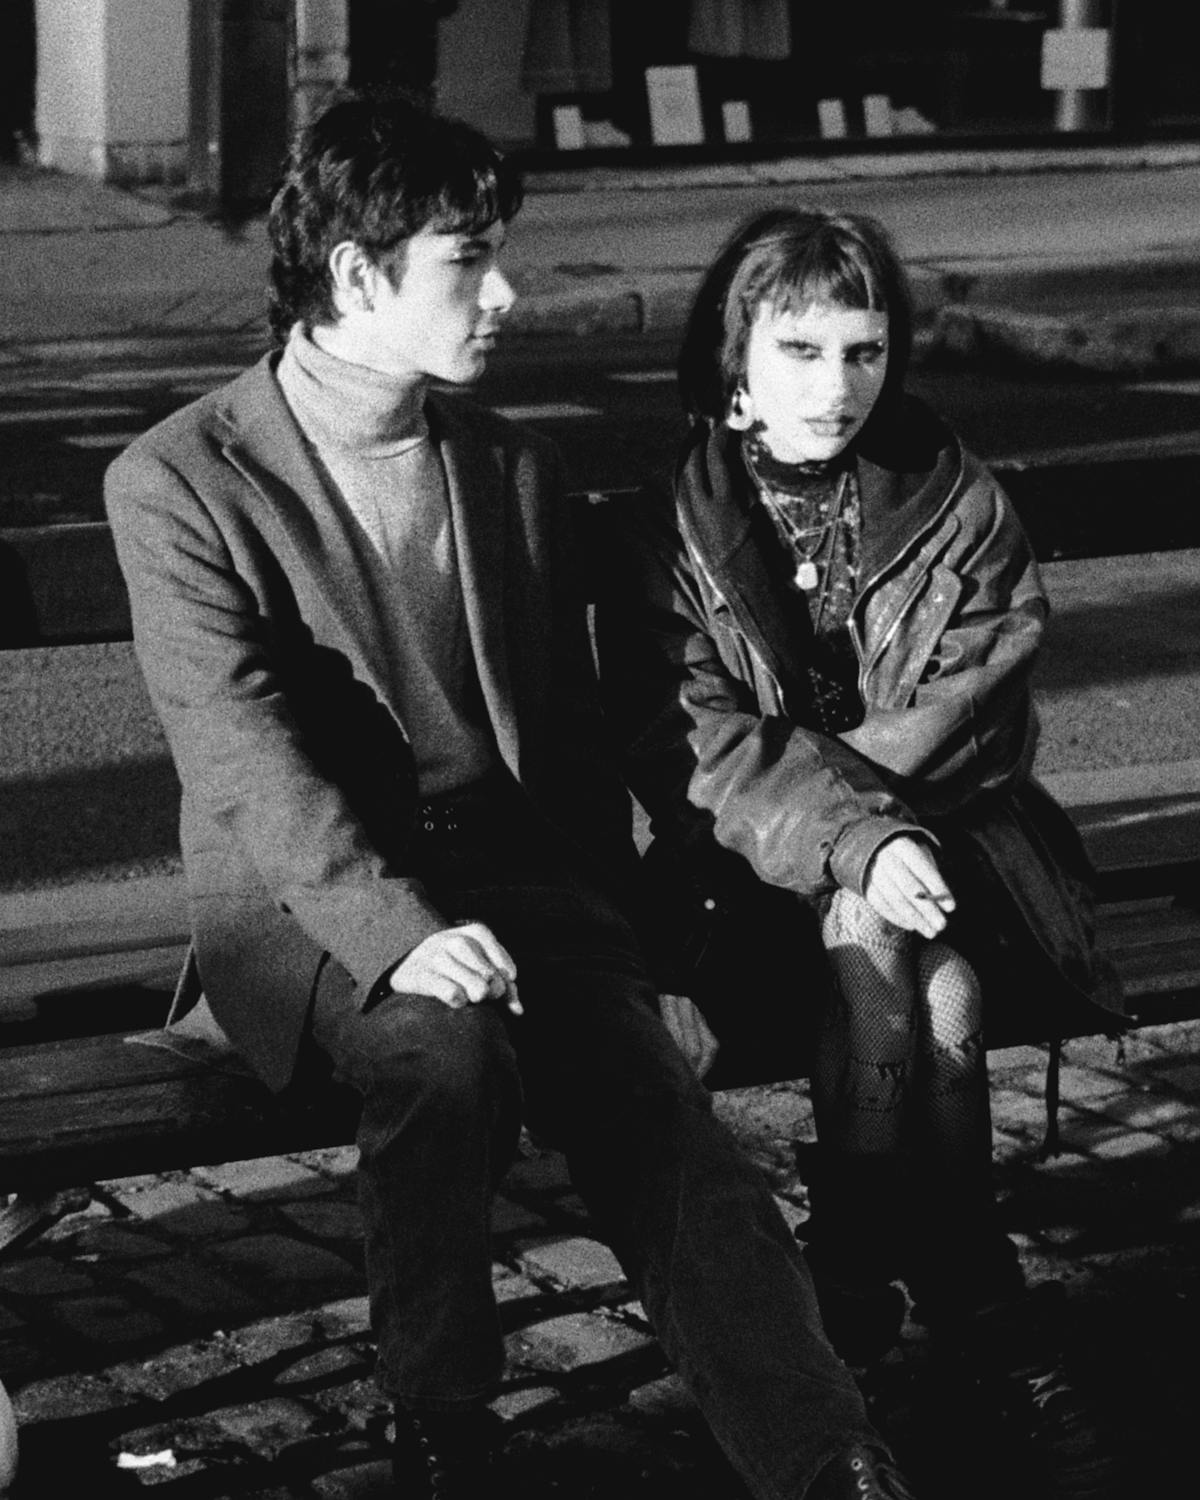 A young couple sitting on a bench.